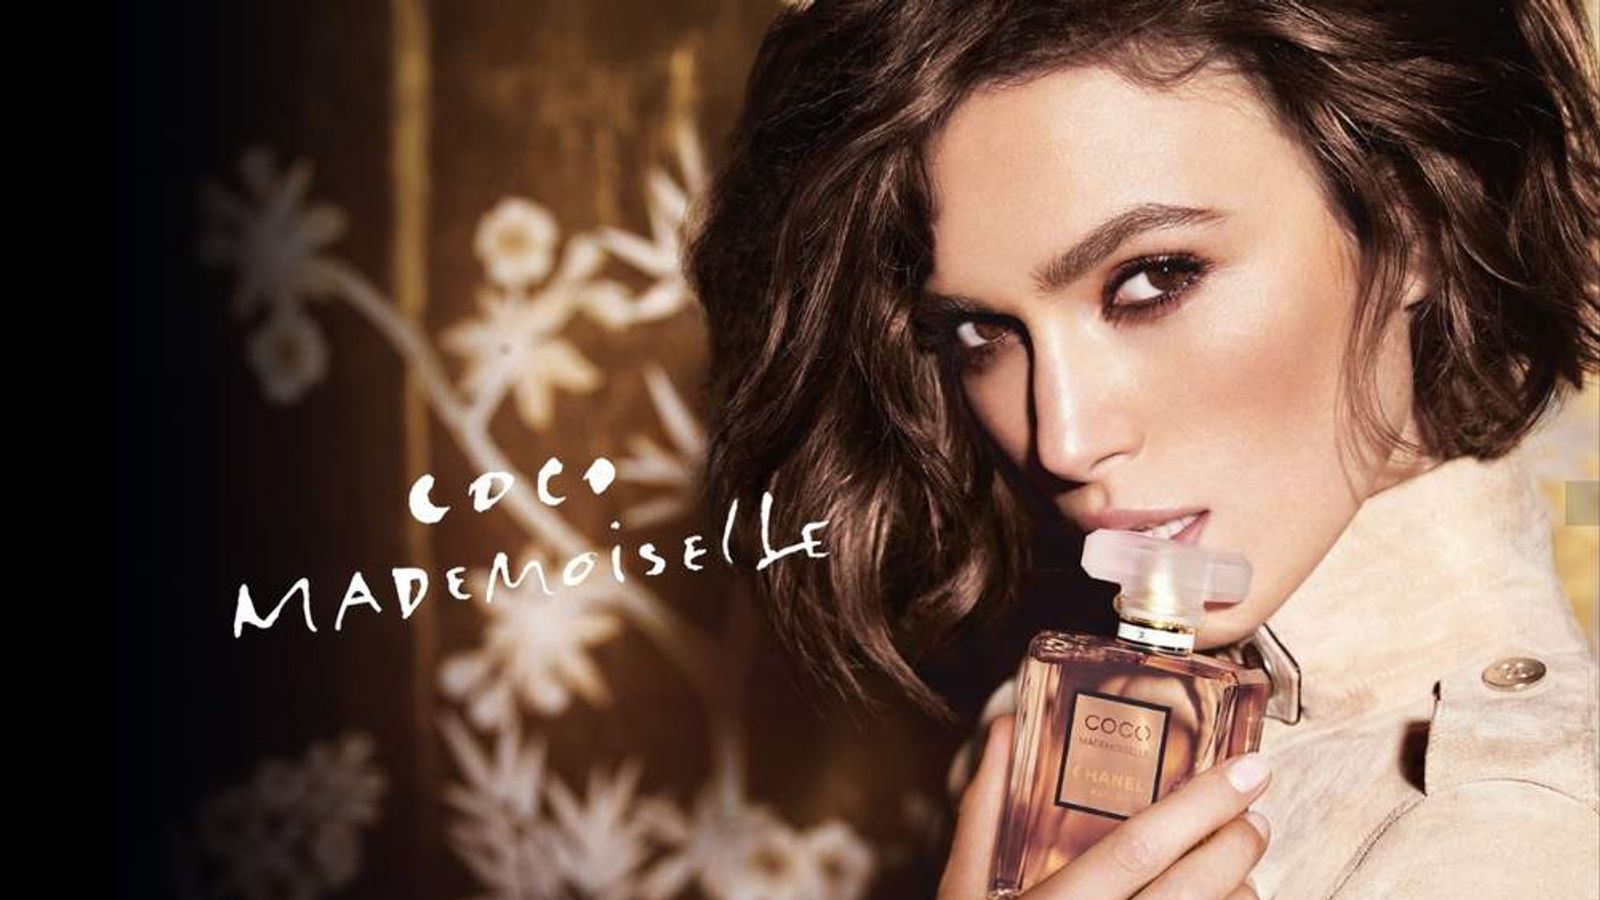 Keira Knightley Chanel Ad 'Too Sexy' For Kids | Ents & Arts News | Sky News